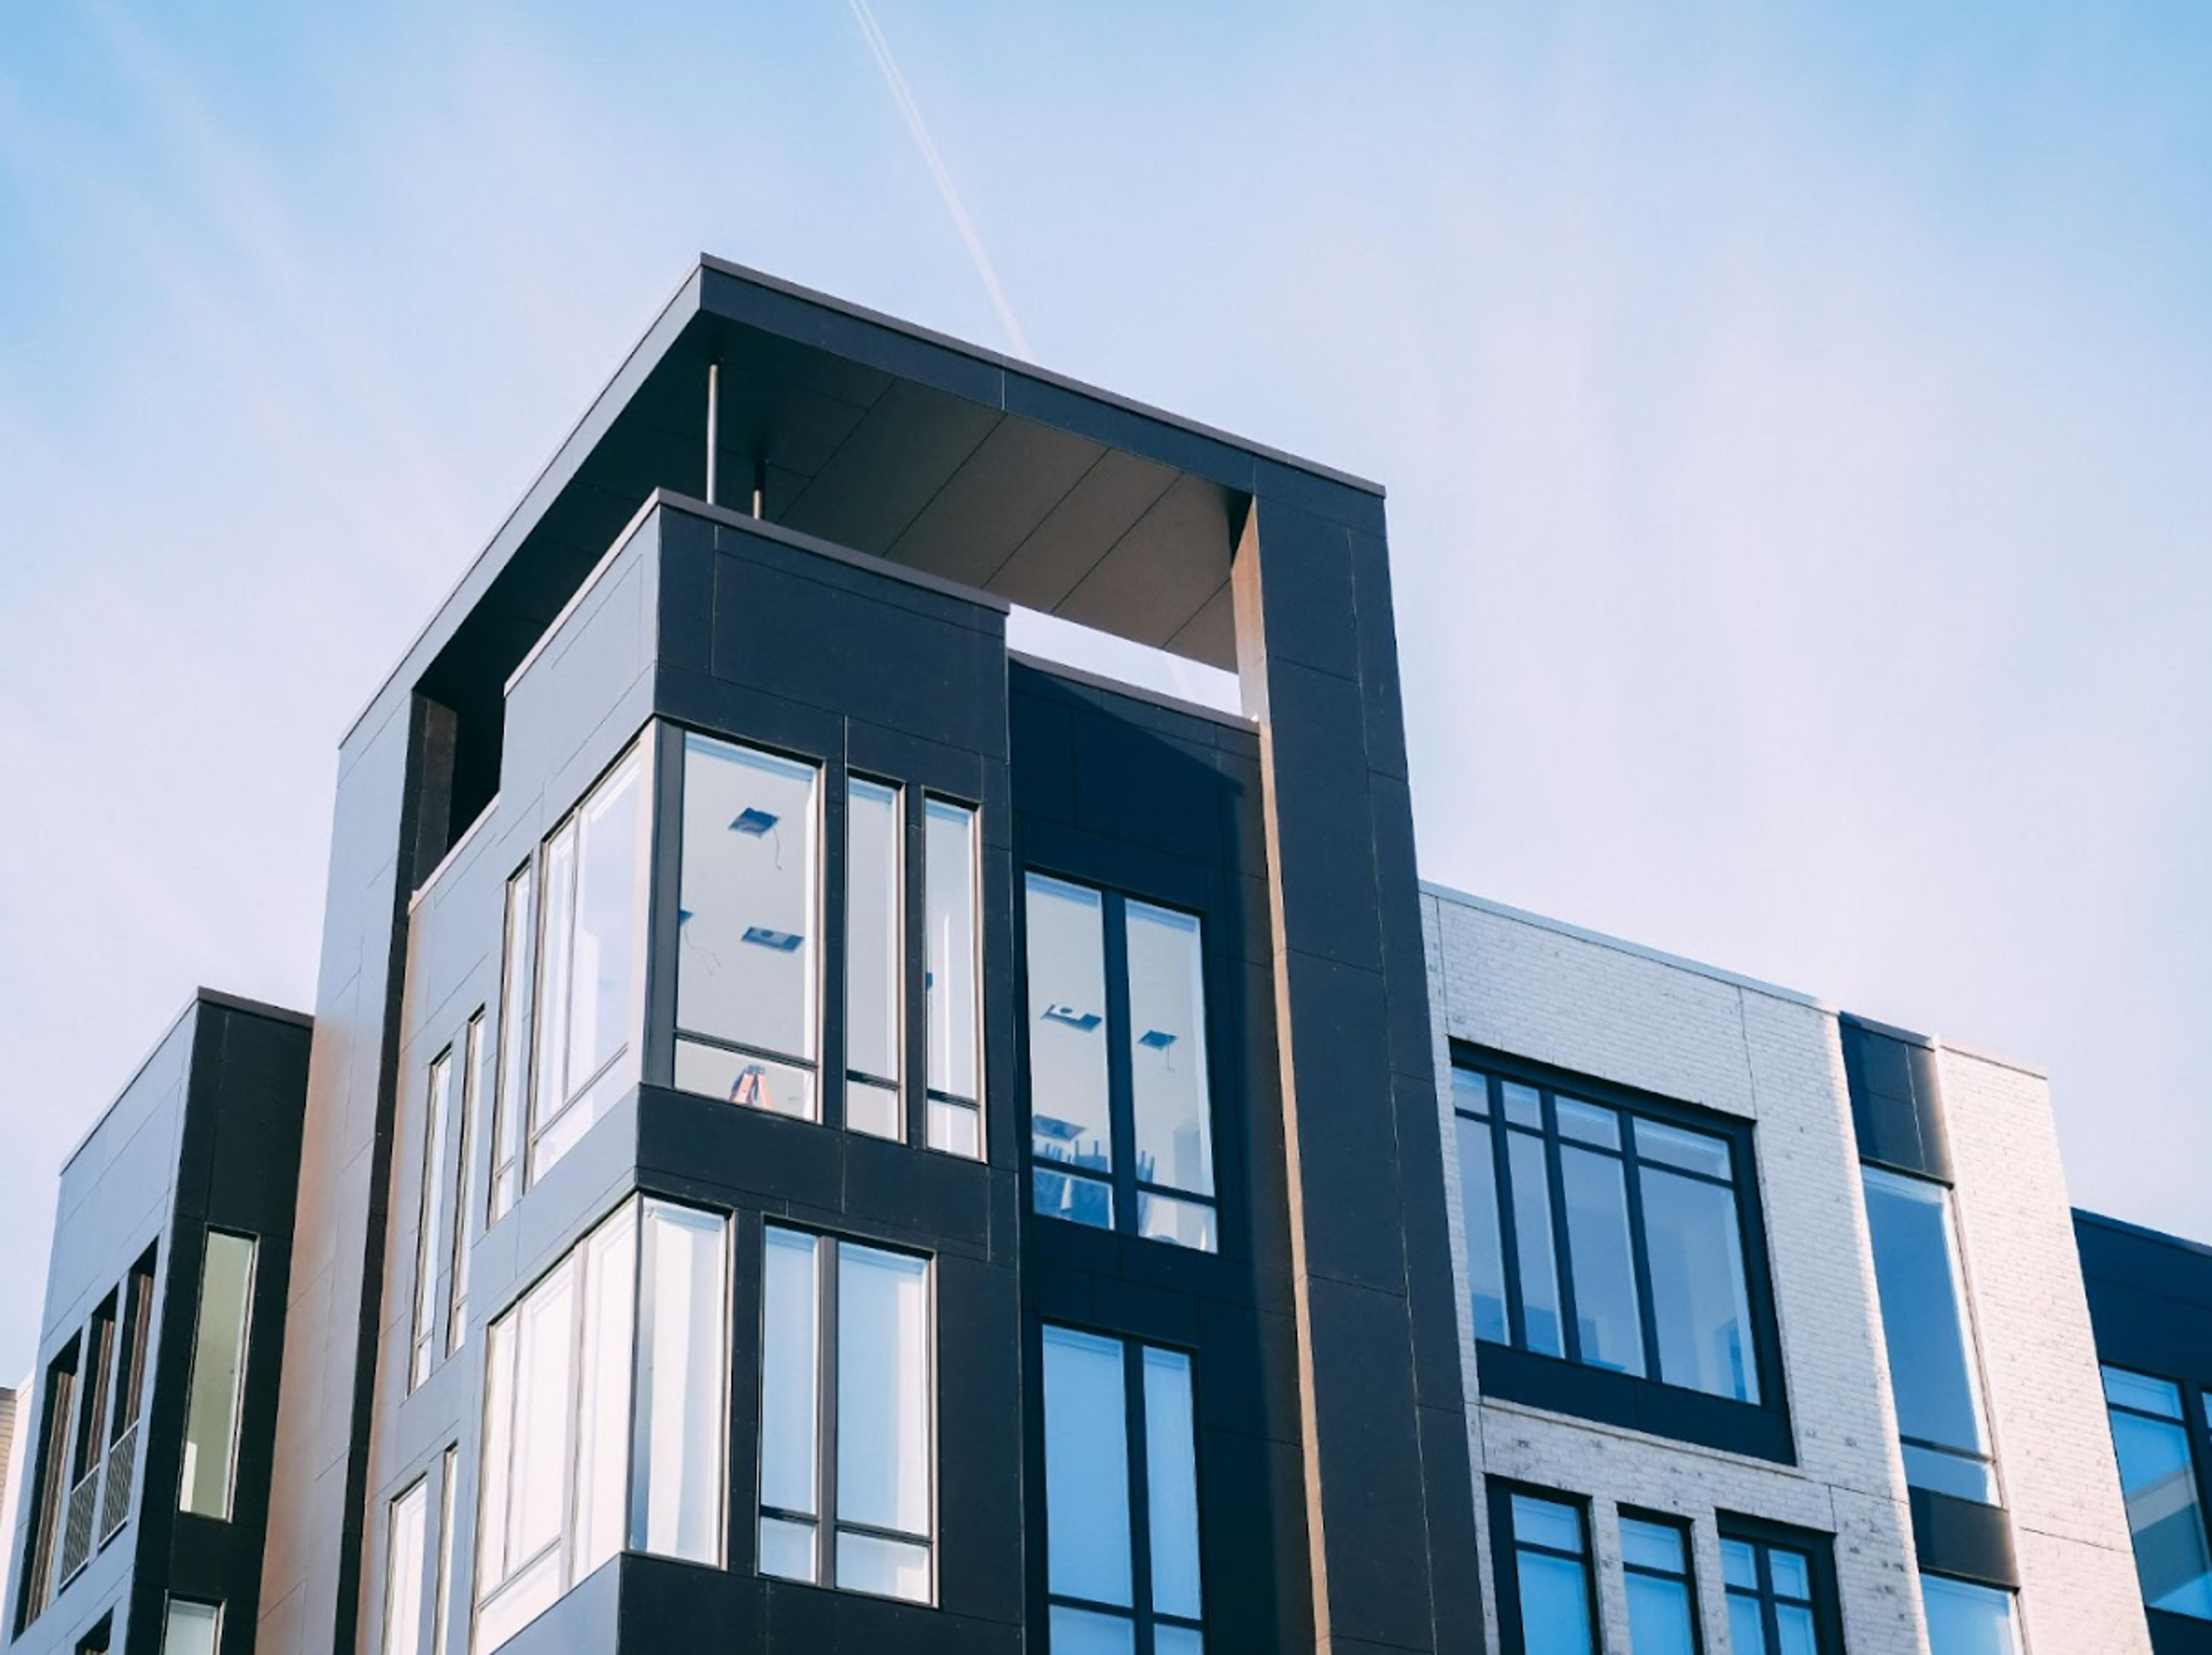 Rentberry CEO Talks To Benzinga About Revolutionizing The Rental Experience